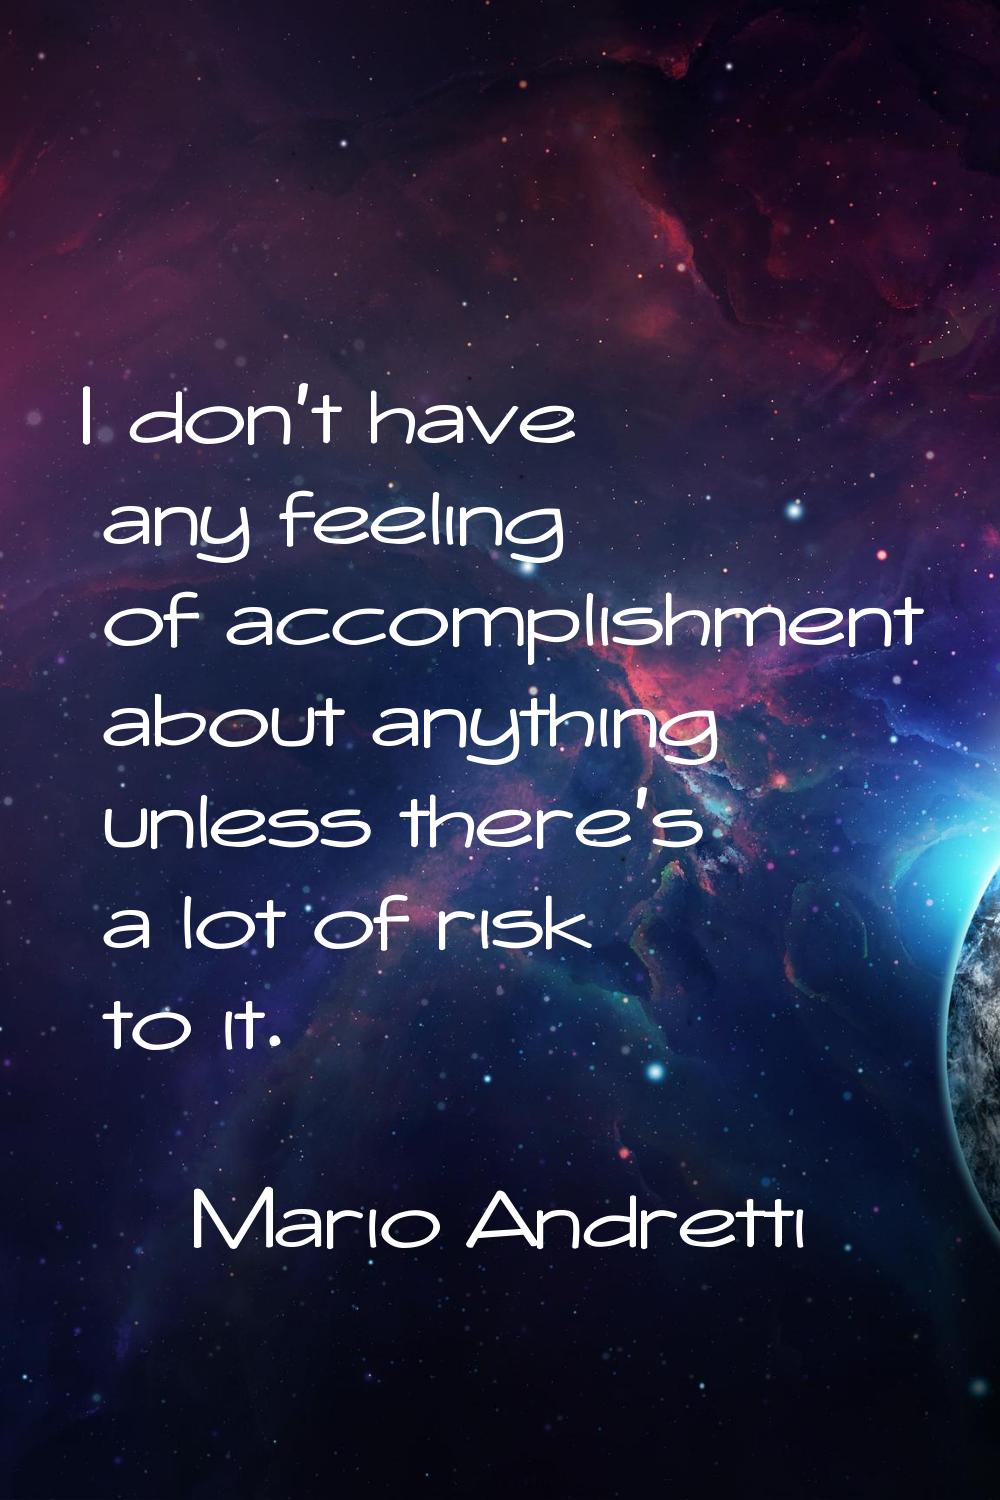 I don't have any feeling of accomplishment about anything unless there's a lot of risk to it.